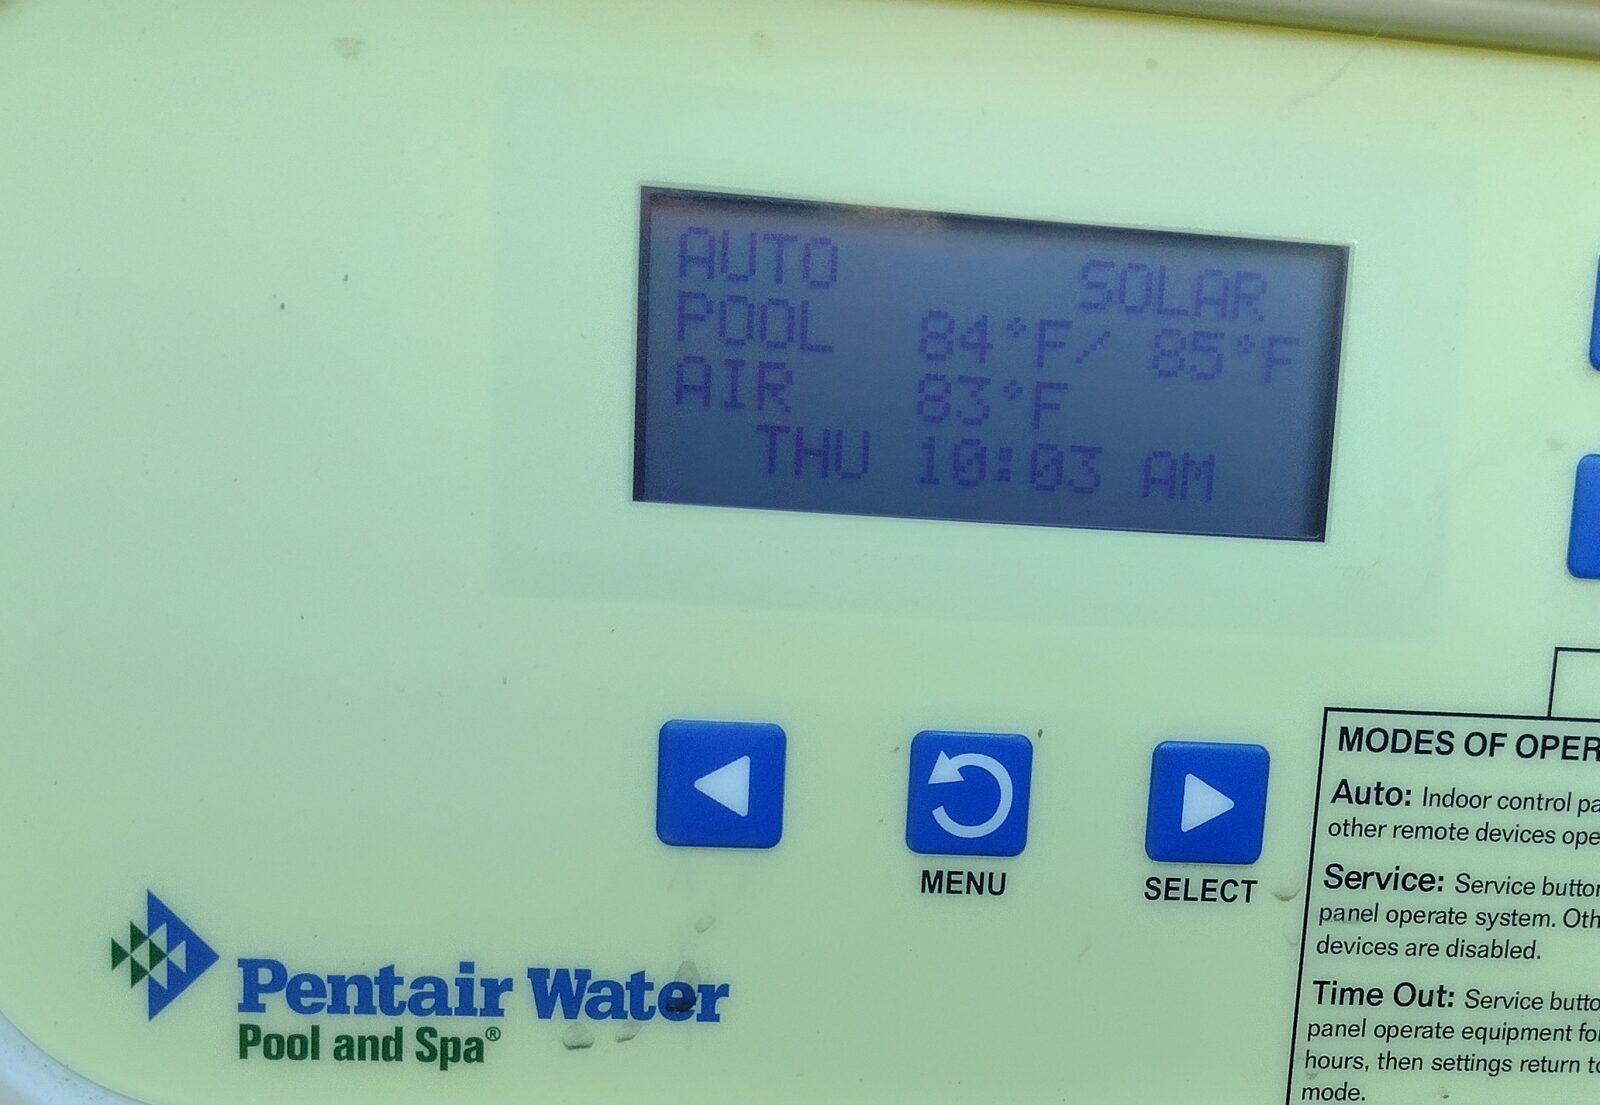 Turning up the solar set temperature does NOT heat your pool faster!